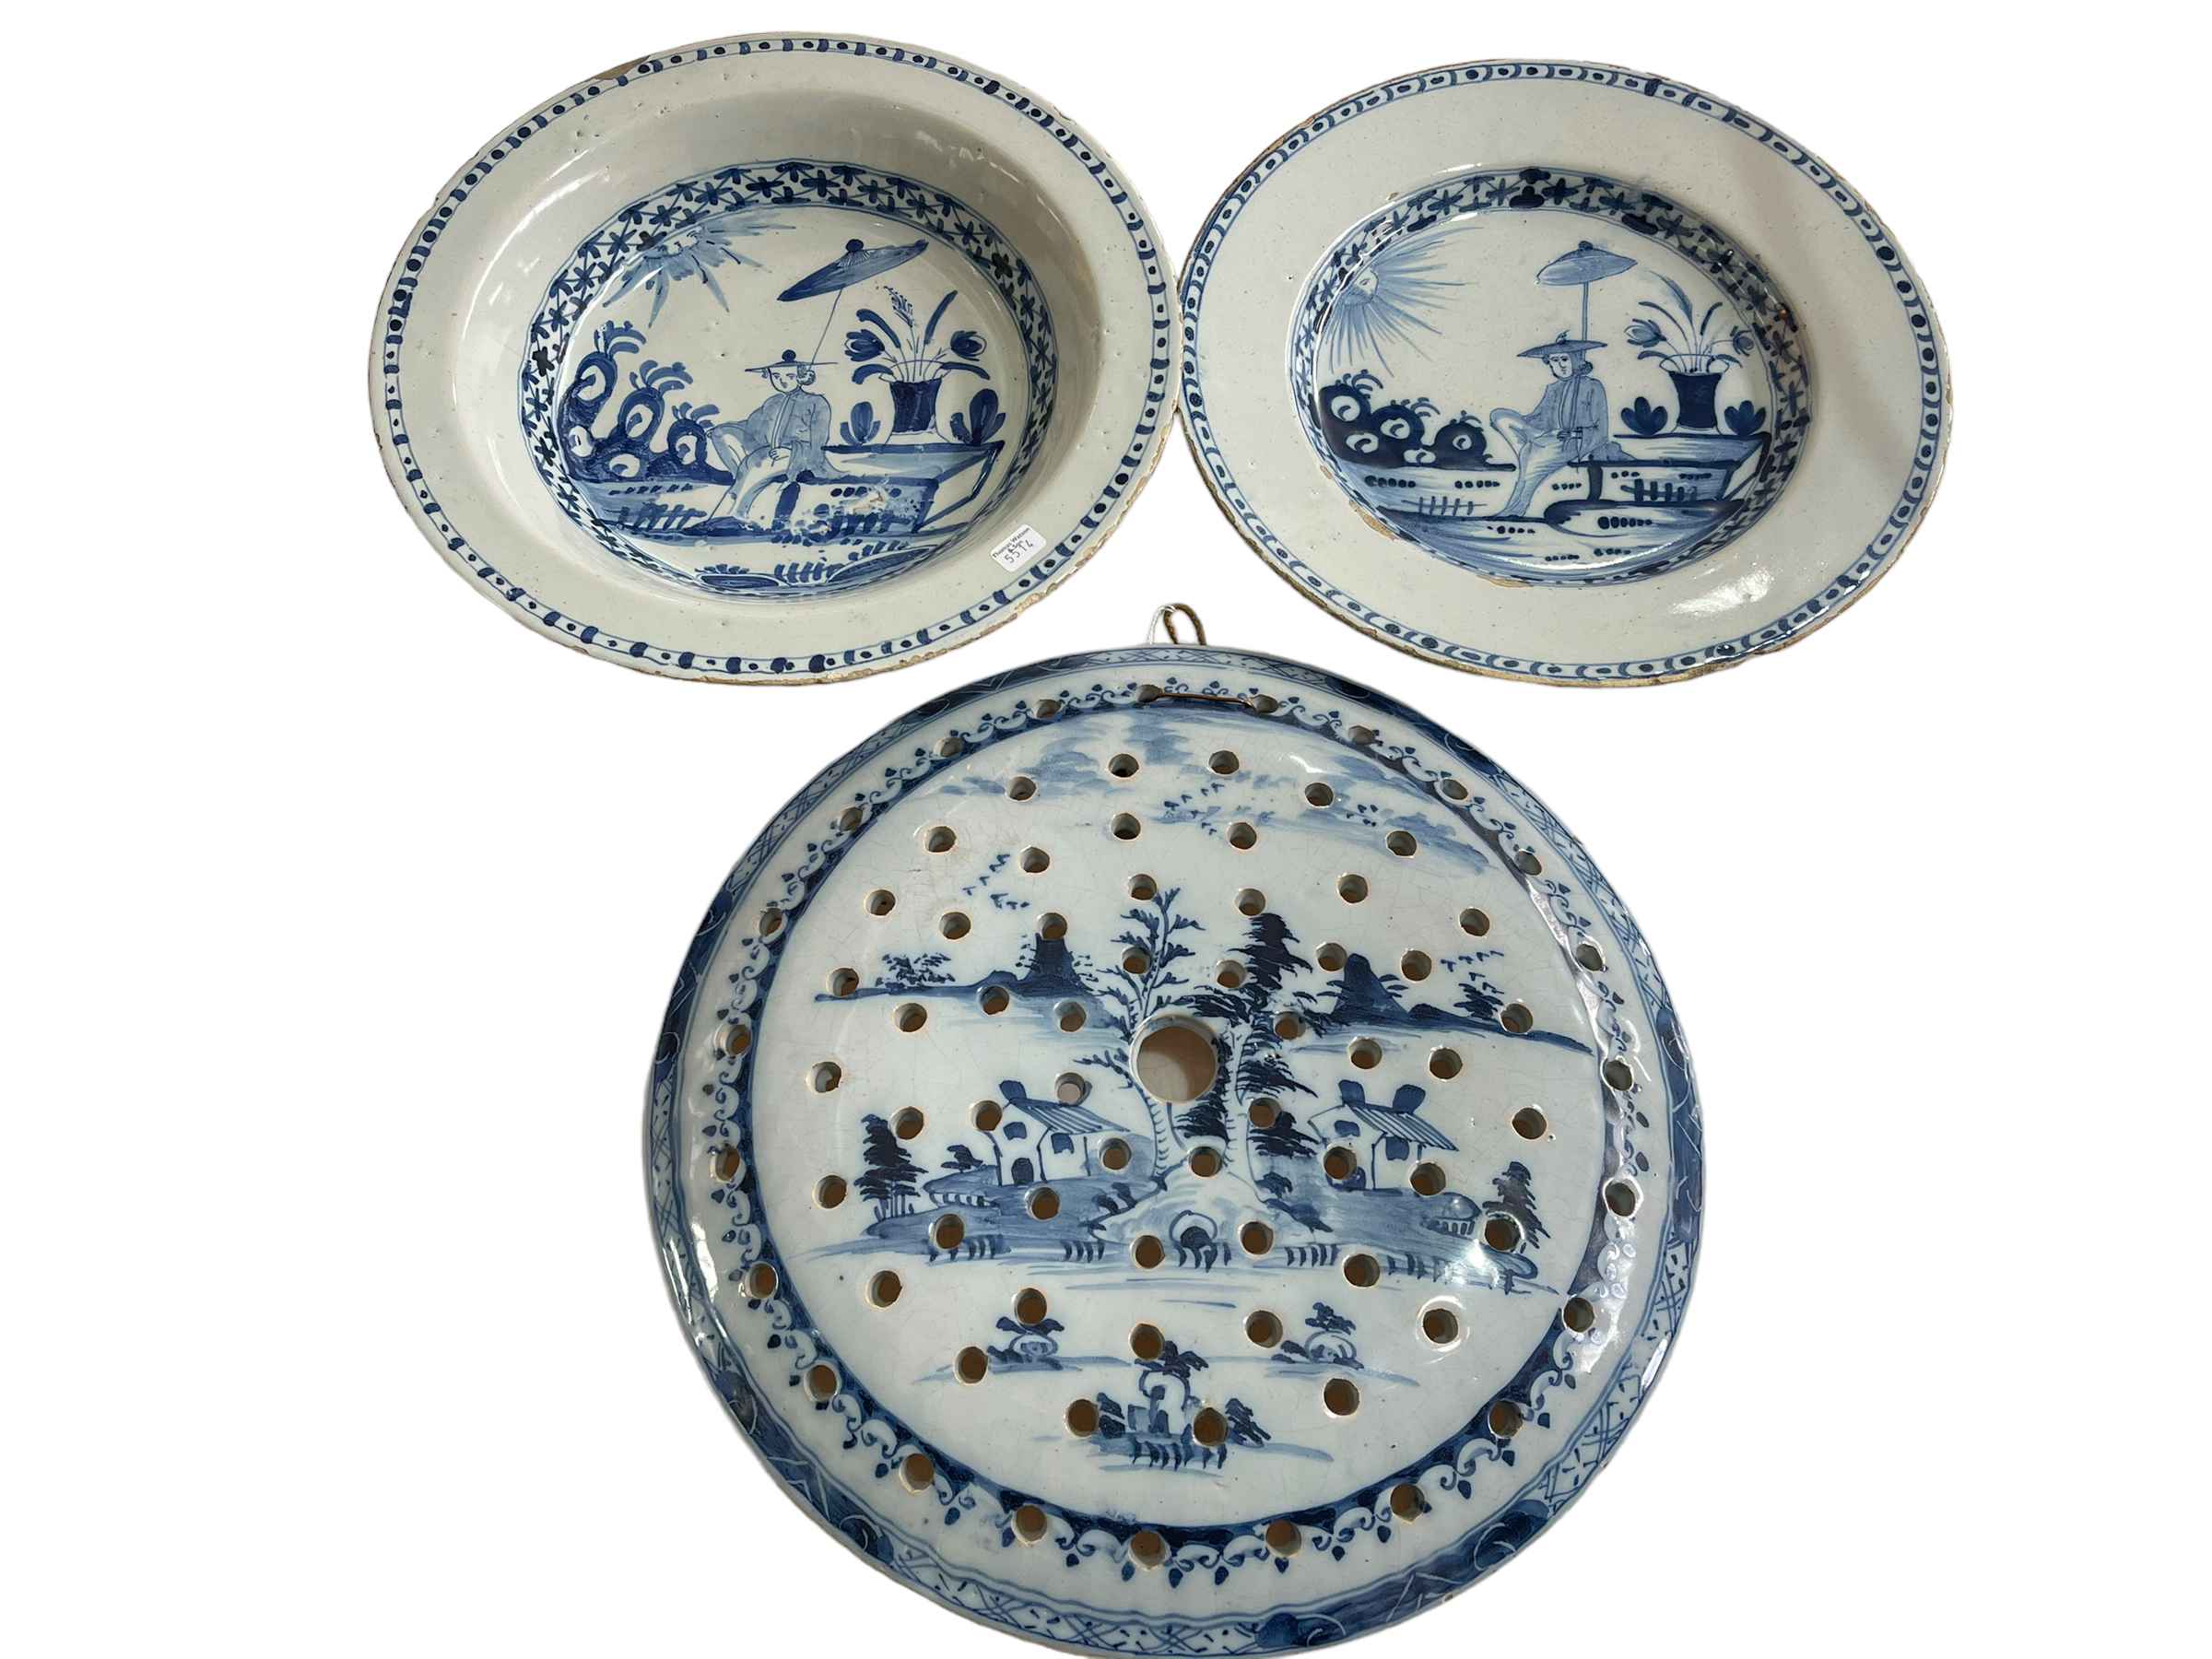 Two antique Delft dishes with chinoiserie figure decoration, both 30.